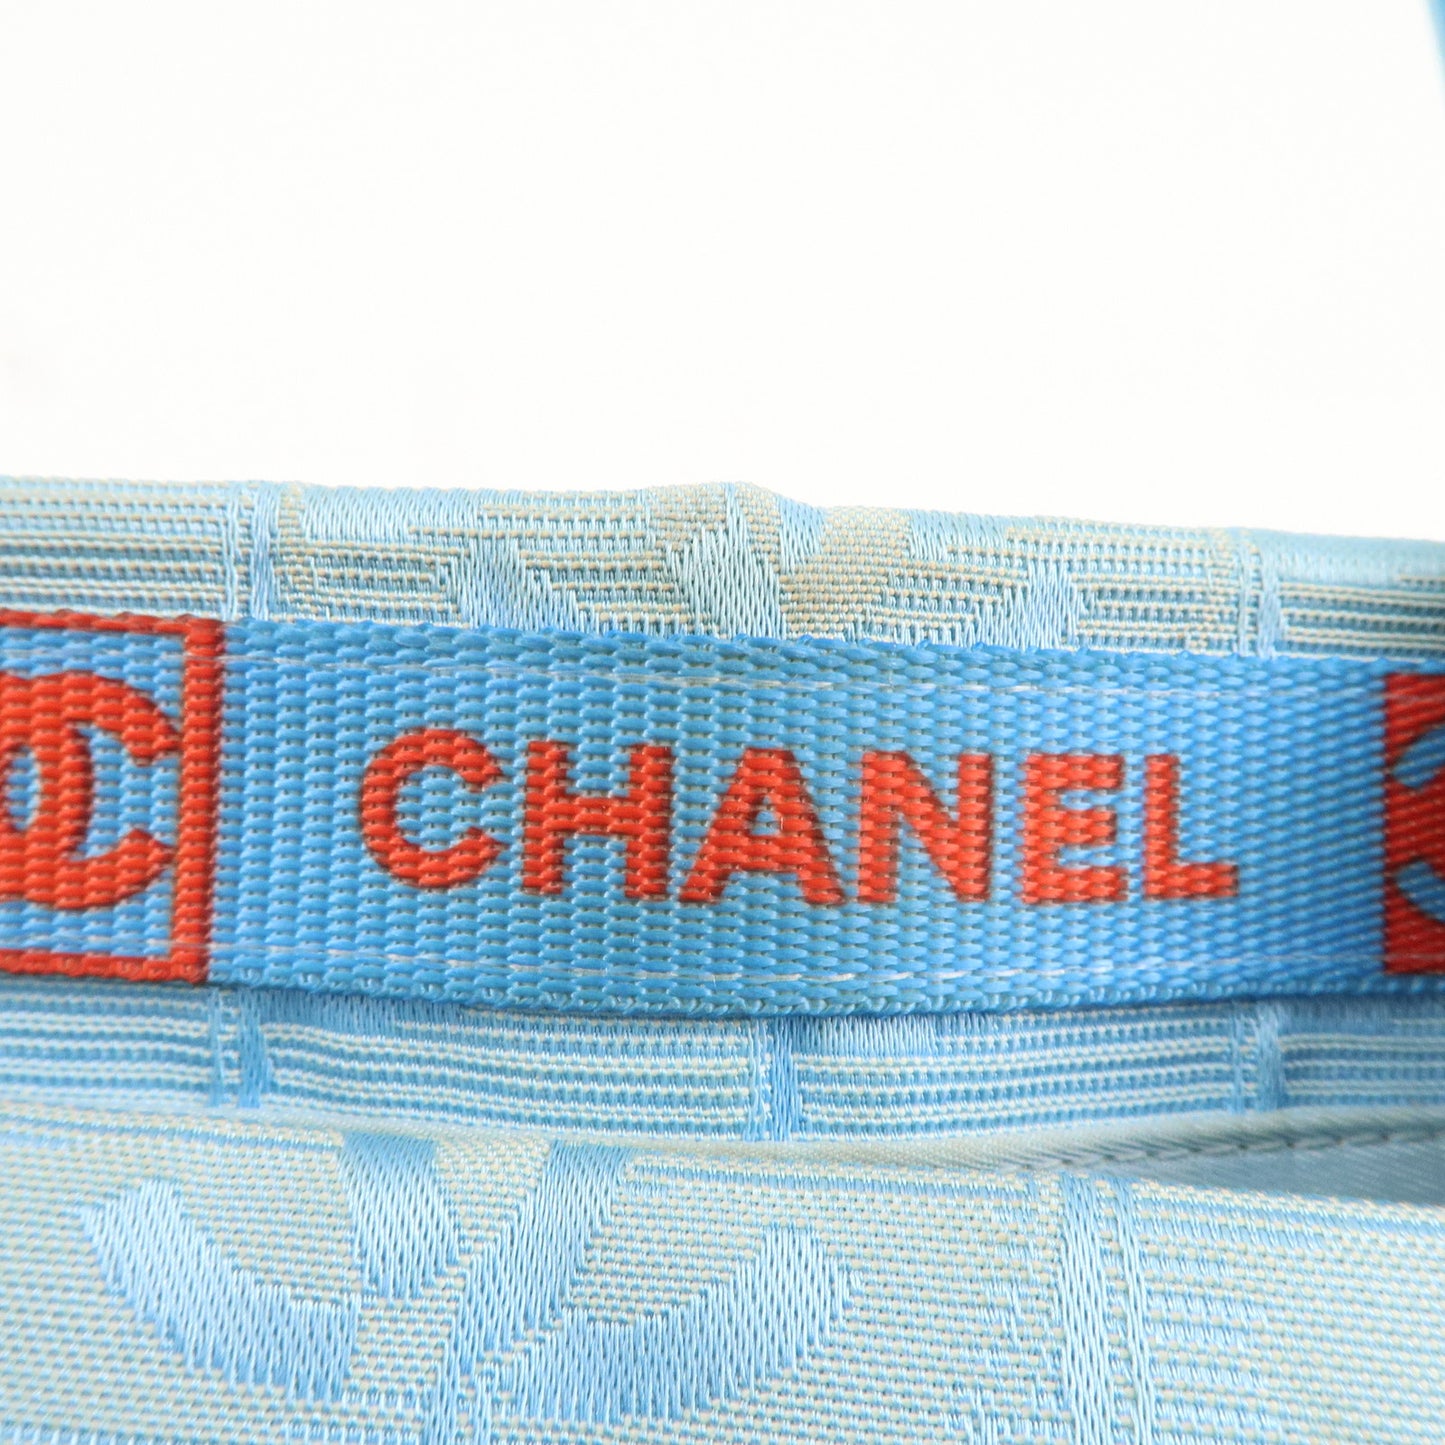 CHANEL New Travel Line Nylon Jacquard Leather Tote Bag Blue A15991